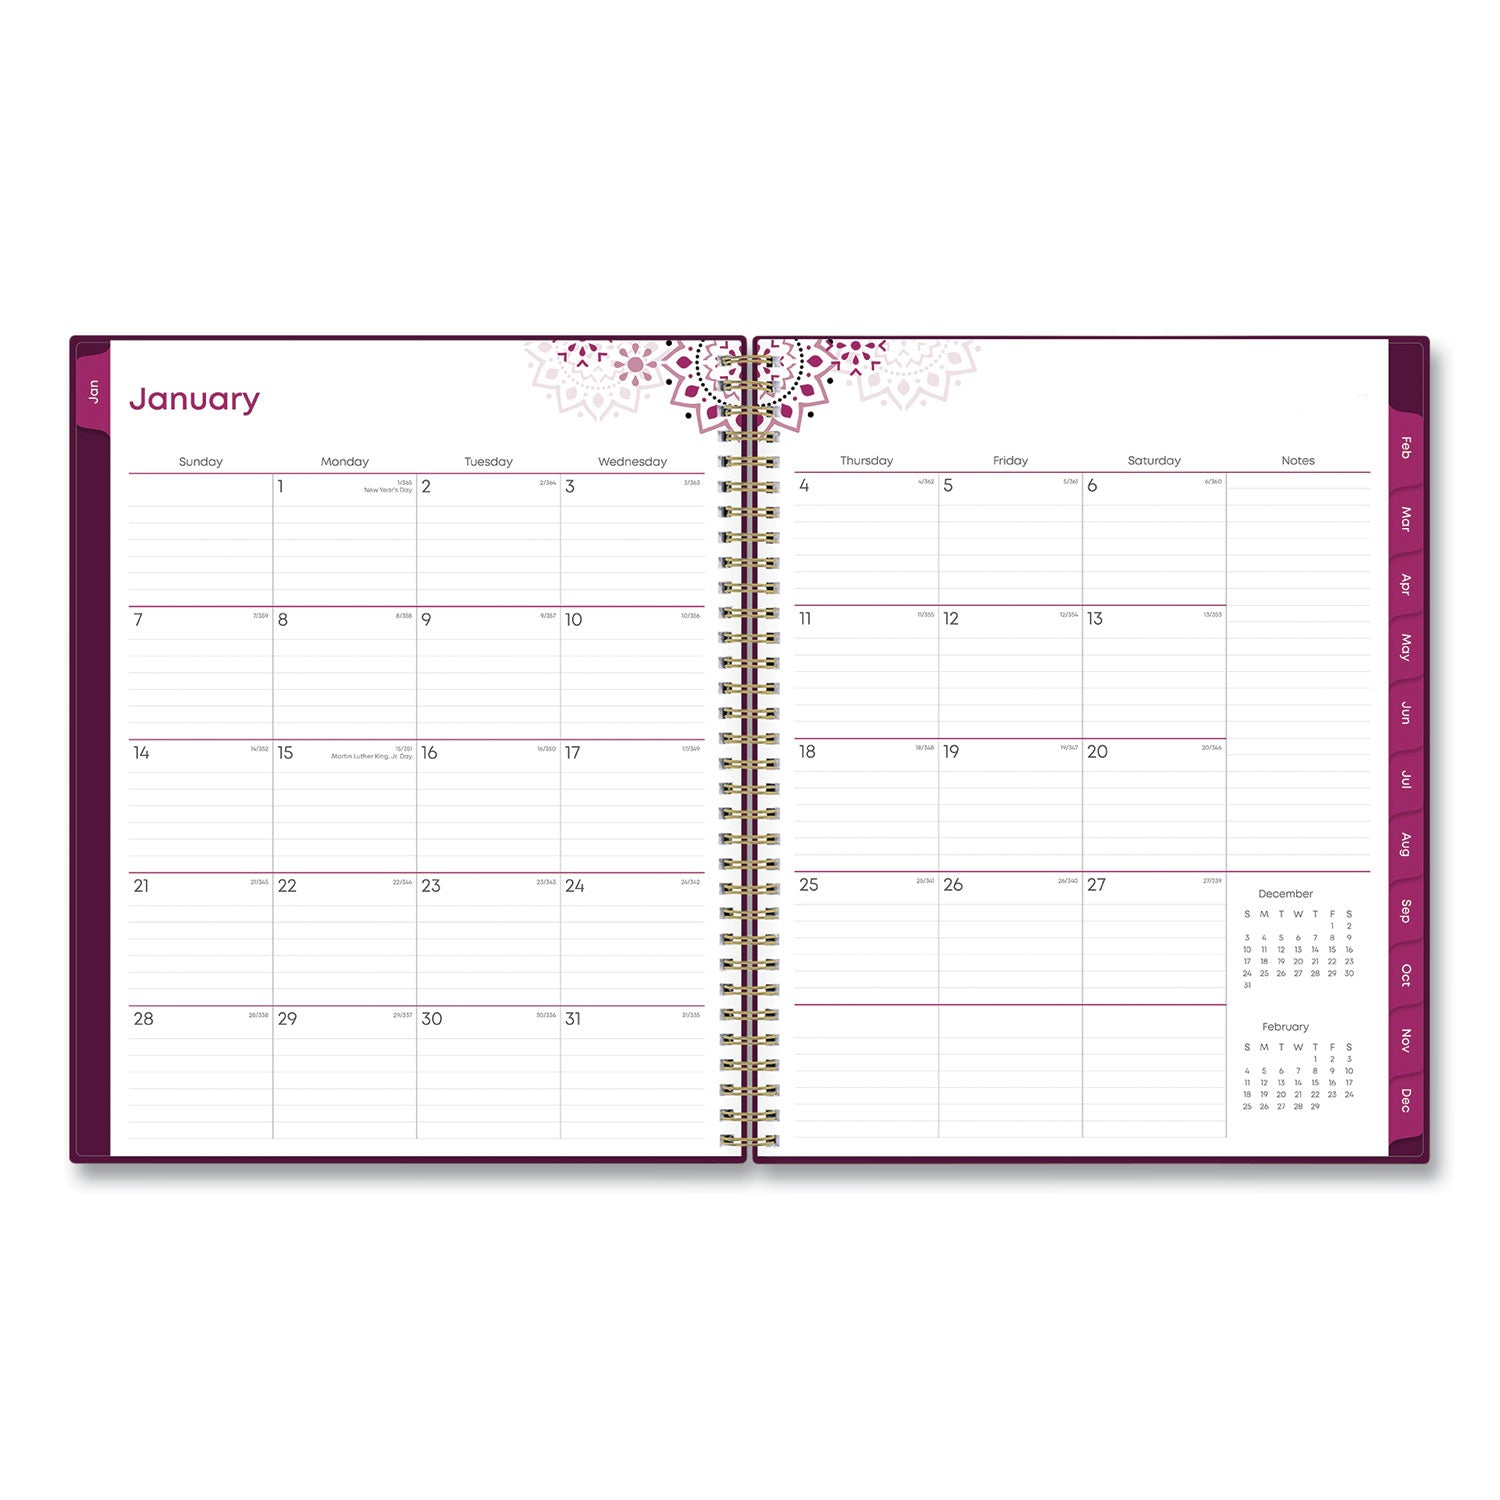 gili-weekly-monthly-planner-gili-jewel-tone-artwork-11-x-85-plum-cover-12-month-jan-to-dec-2024_bls117889 - 3